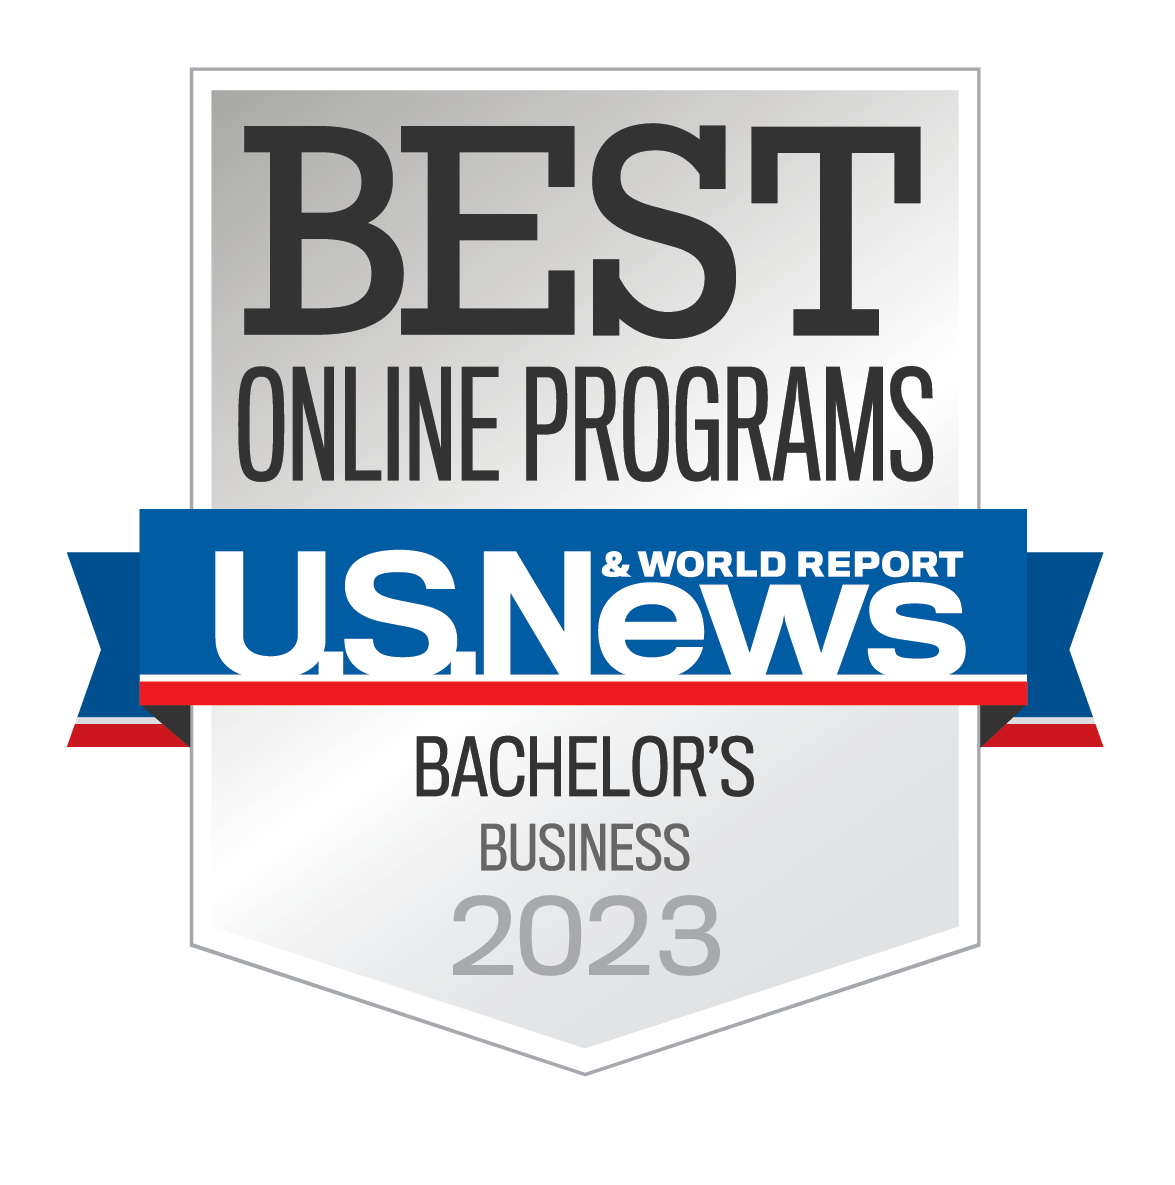 U.S. News and World reports. Best Online Programs: Bachelor's of Business 2023